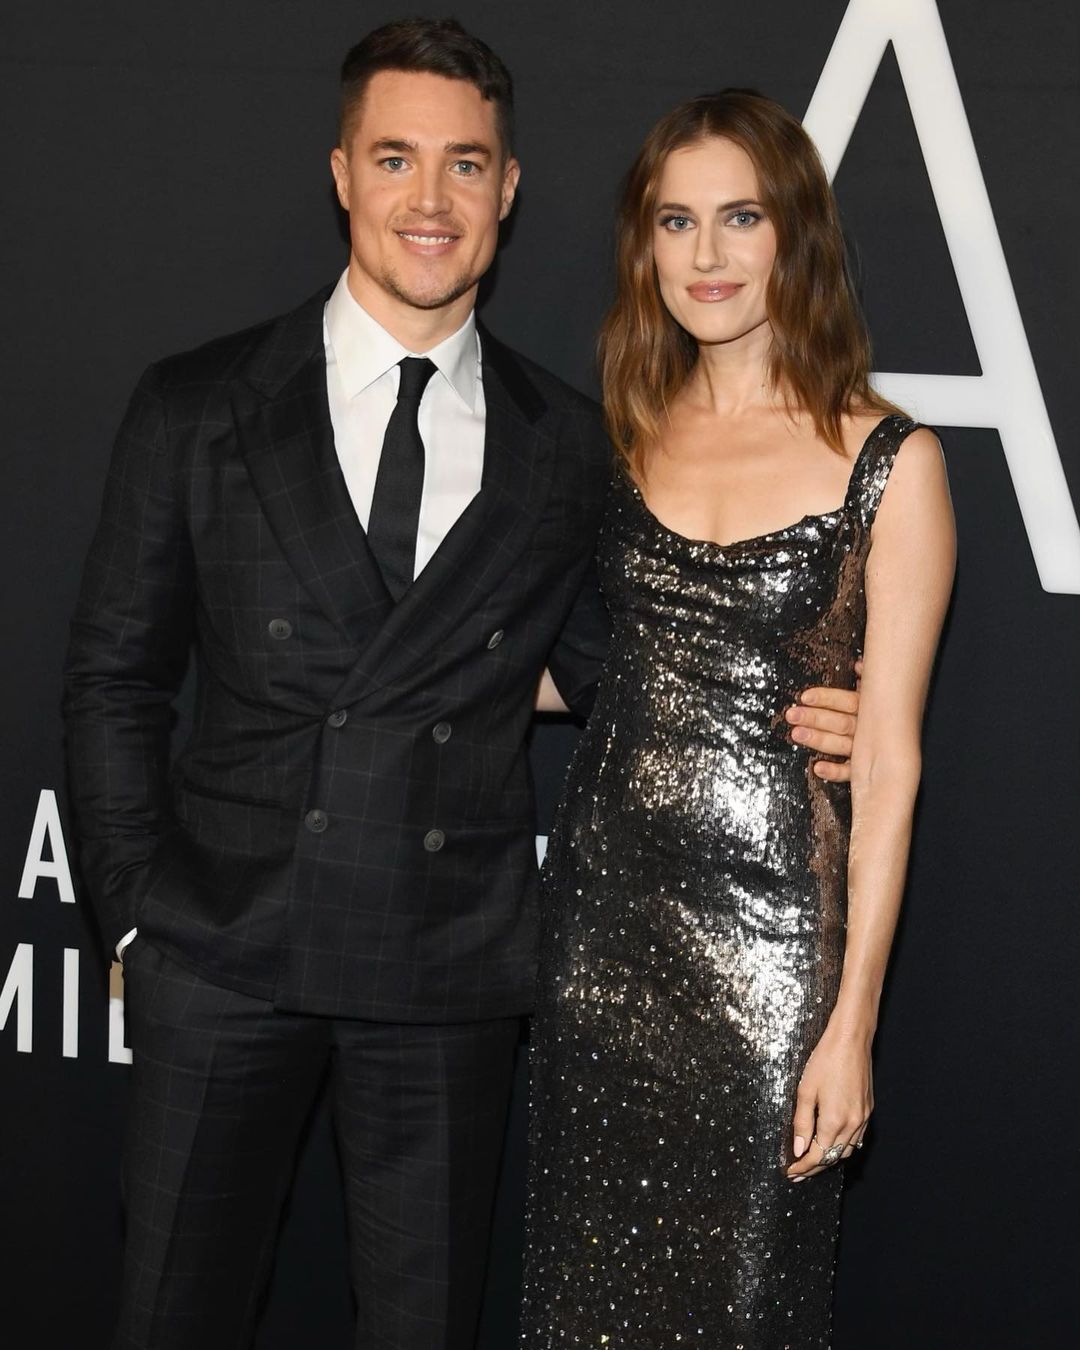 Allison Williams' fiancé, Alexander Dreymon, confirmed that the pair were engaged at the premiere of 'M3GAN.' 